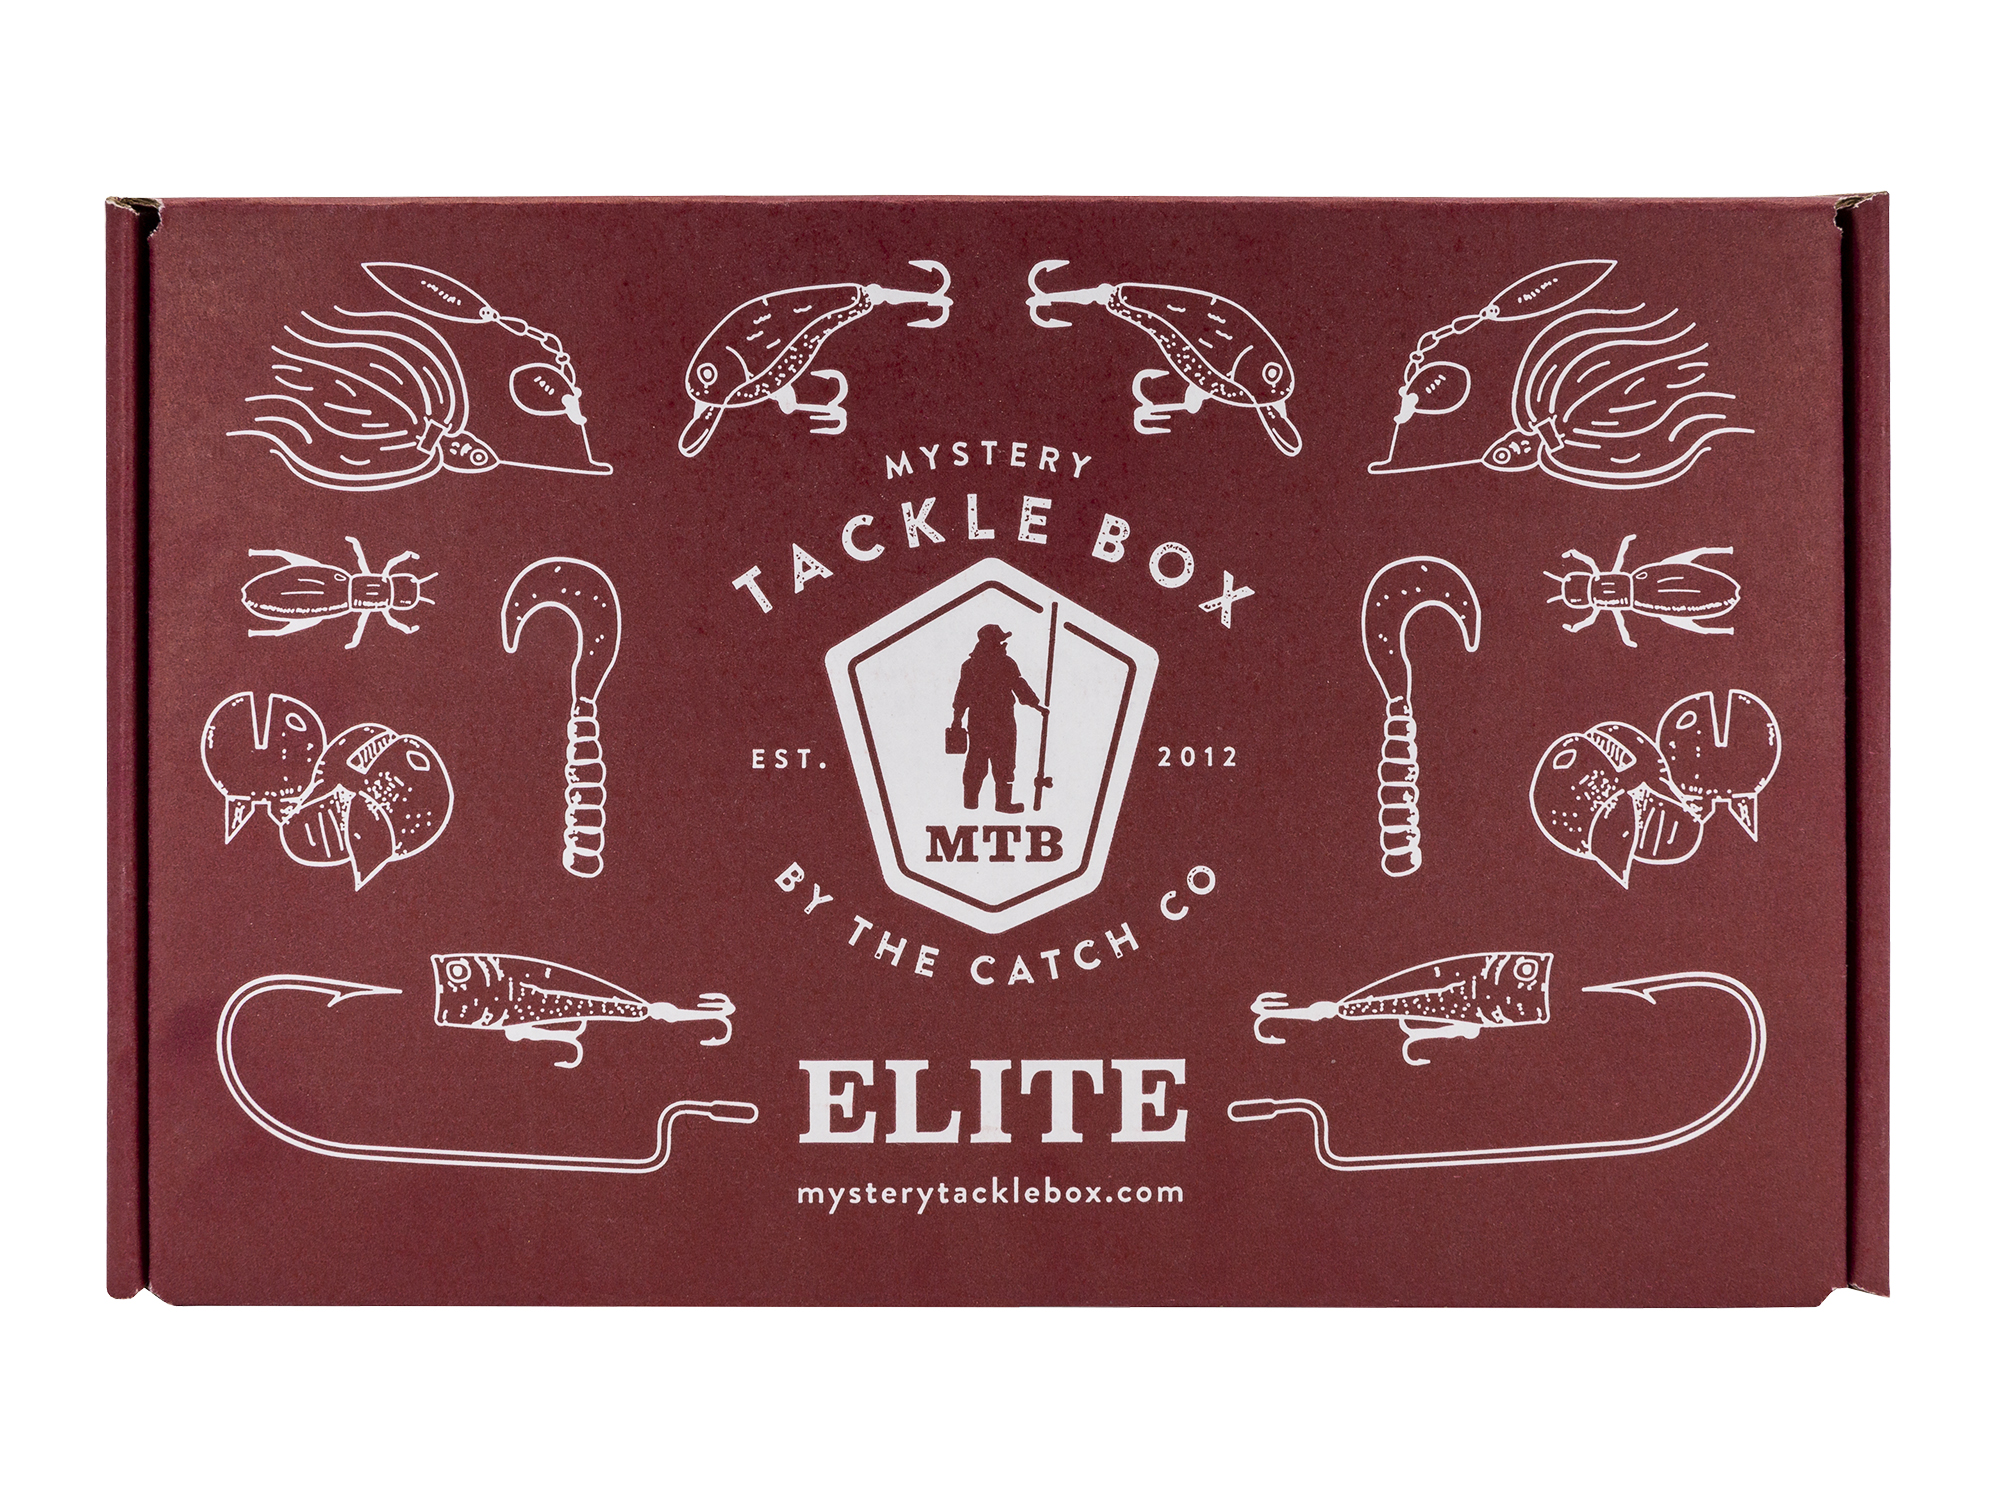 Mystery Tackle Box ELITE UNBOXING! The best box for Father's Day